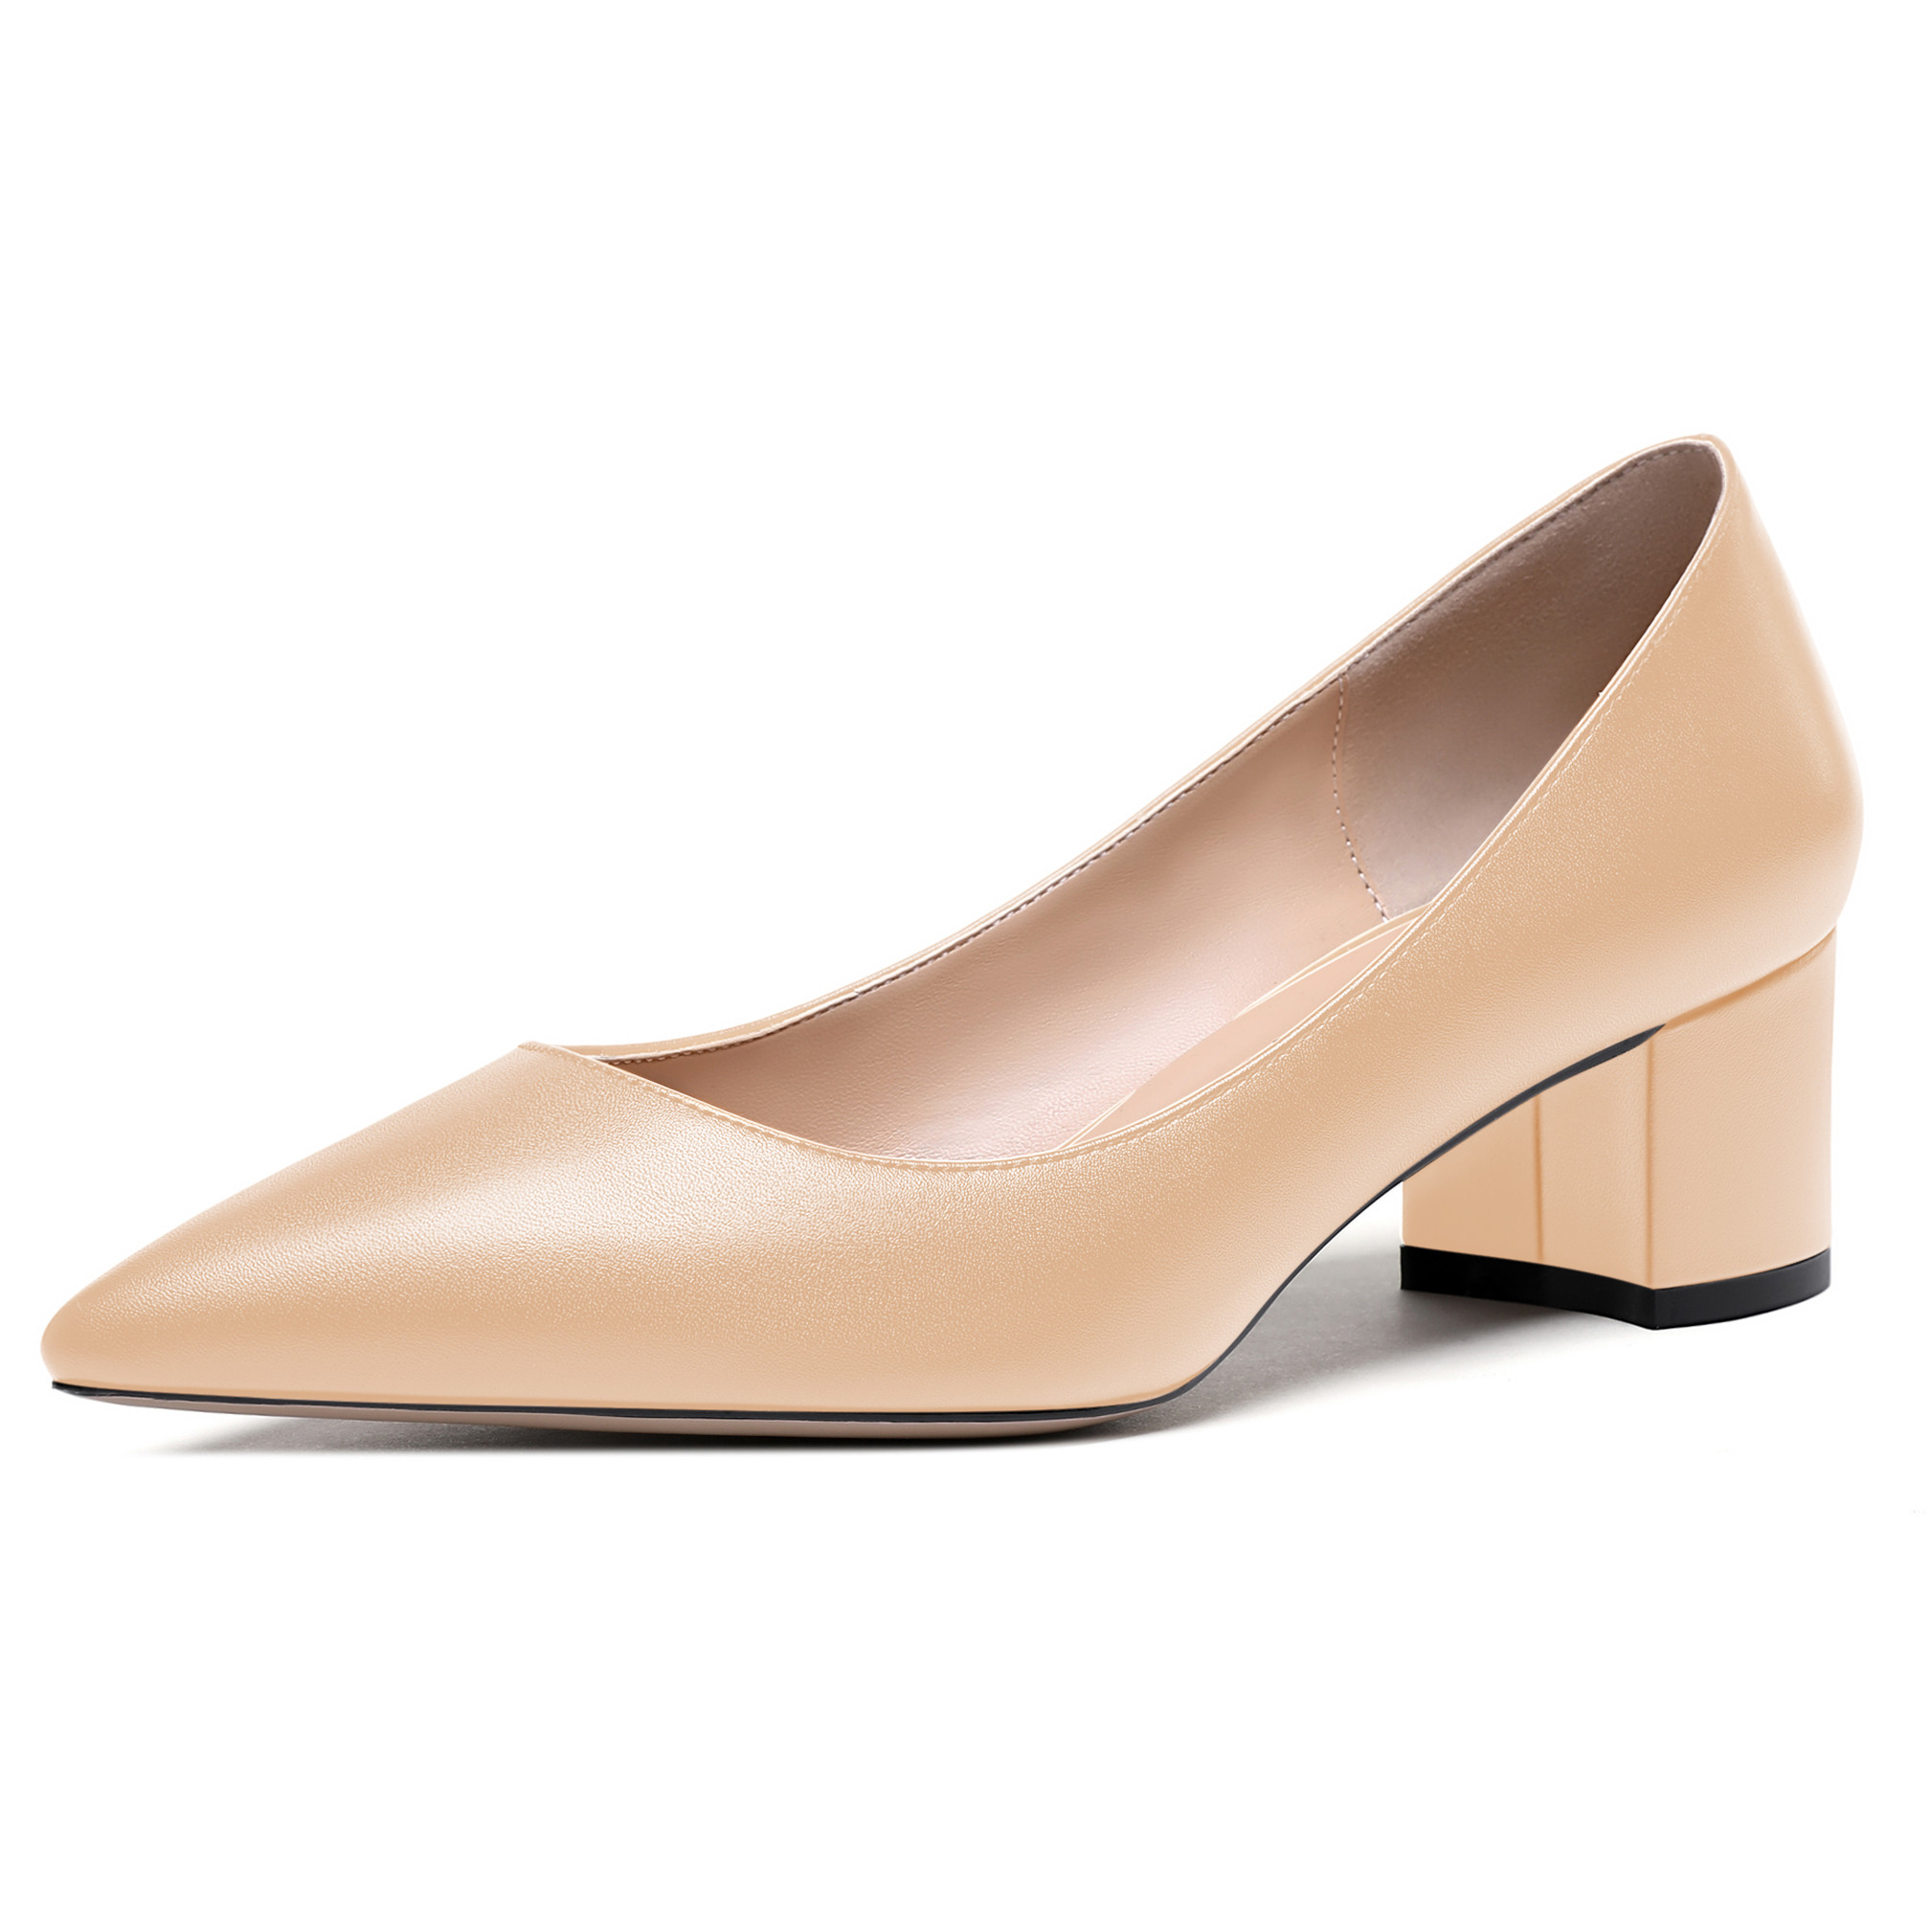 Cailey Matte Pointed Toe Slip On Pumps